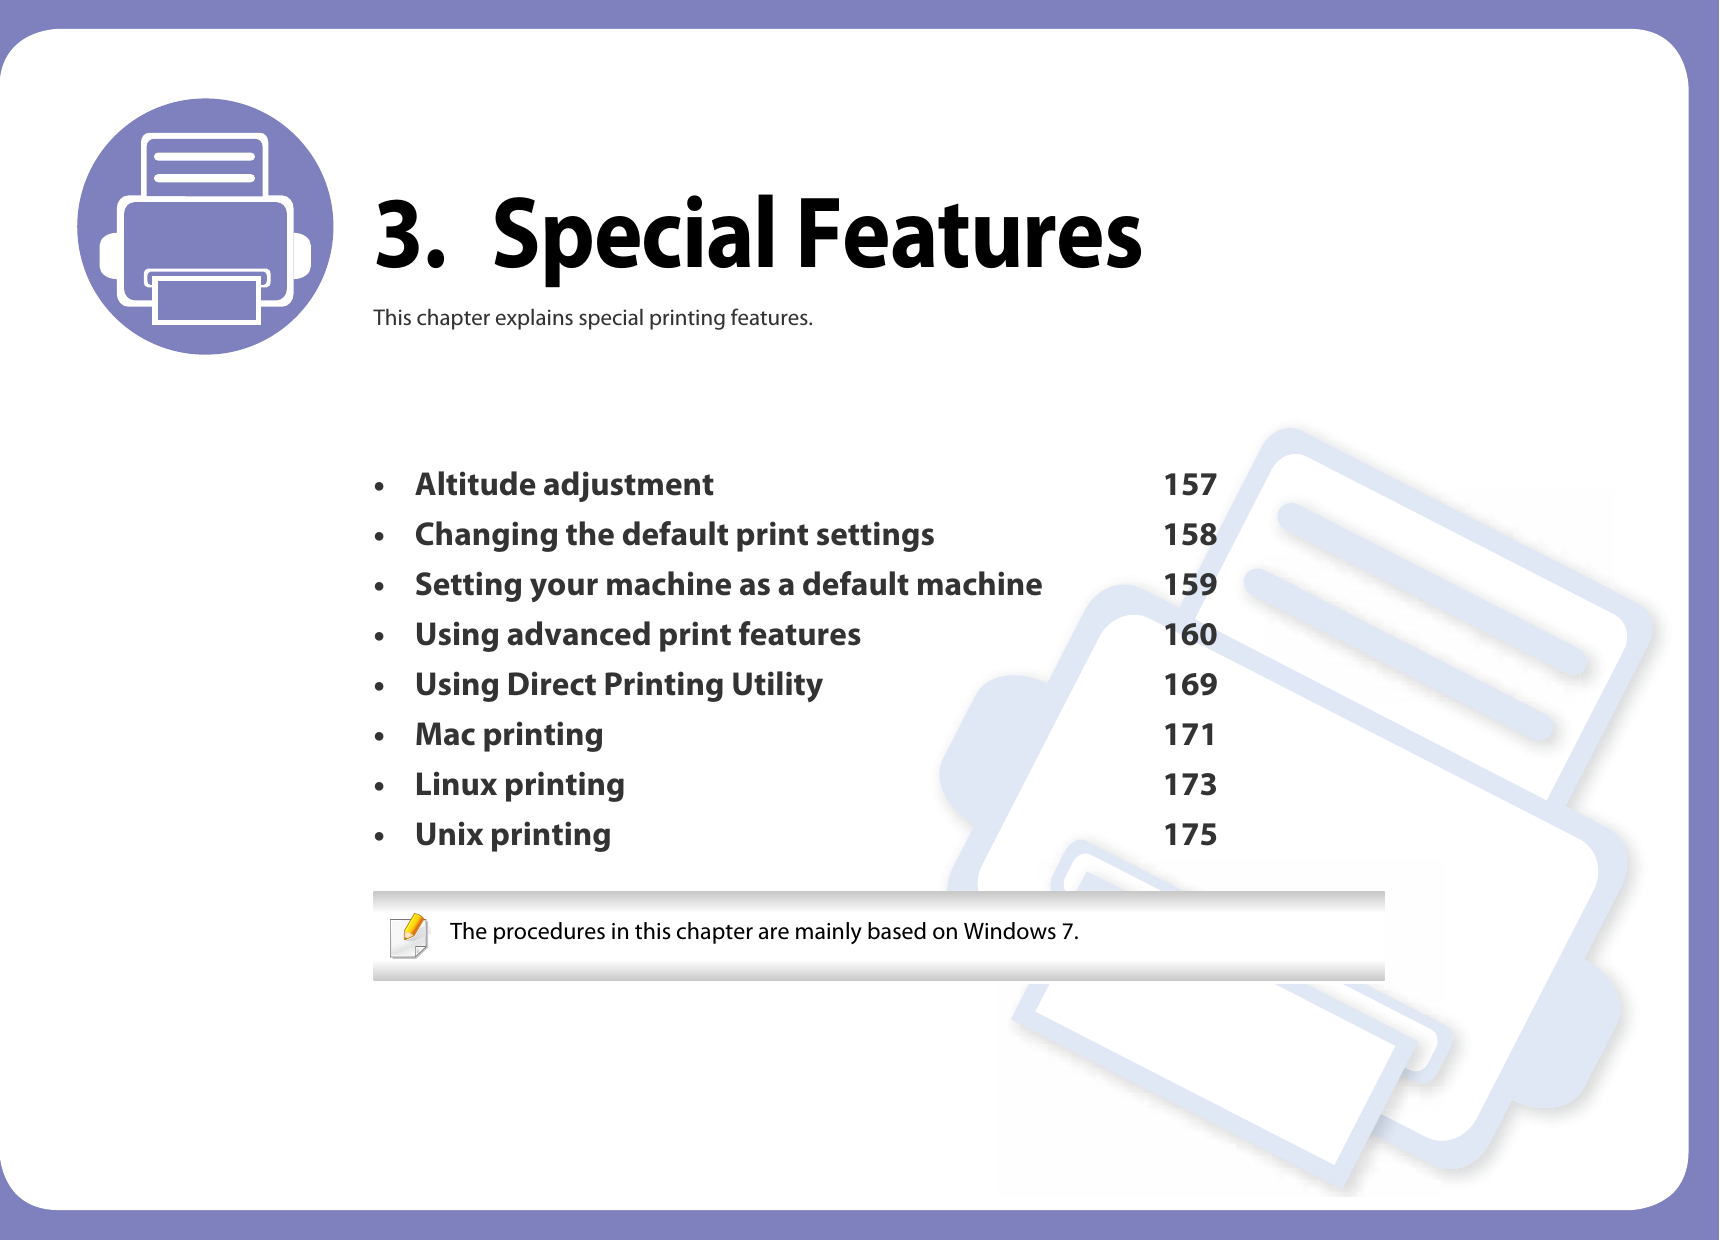 3. Special FeaturesThis chapter explains special printing features.• Altitude adjustment 157• Changing the default print settings 158• Setting your machine as a default machine 159• Using advanced print features 160• Using Direct Printing Utility 169• Mac printing 171• Linux printing 173• Unix printing 175 The procedures in this chapter are mainly based on Windows 7. 